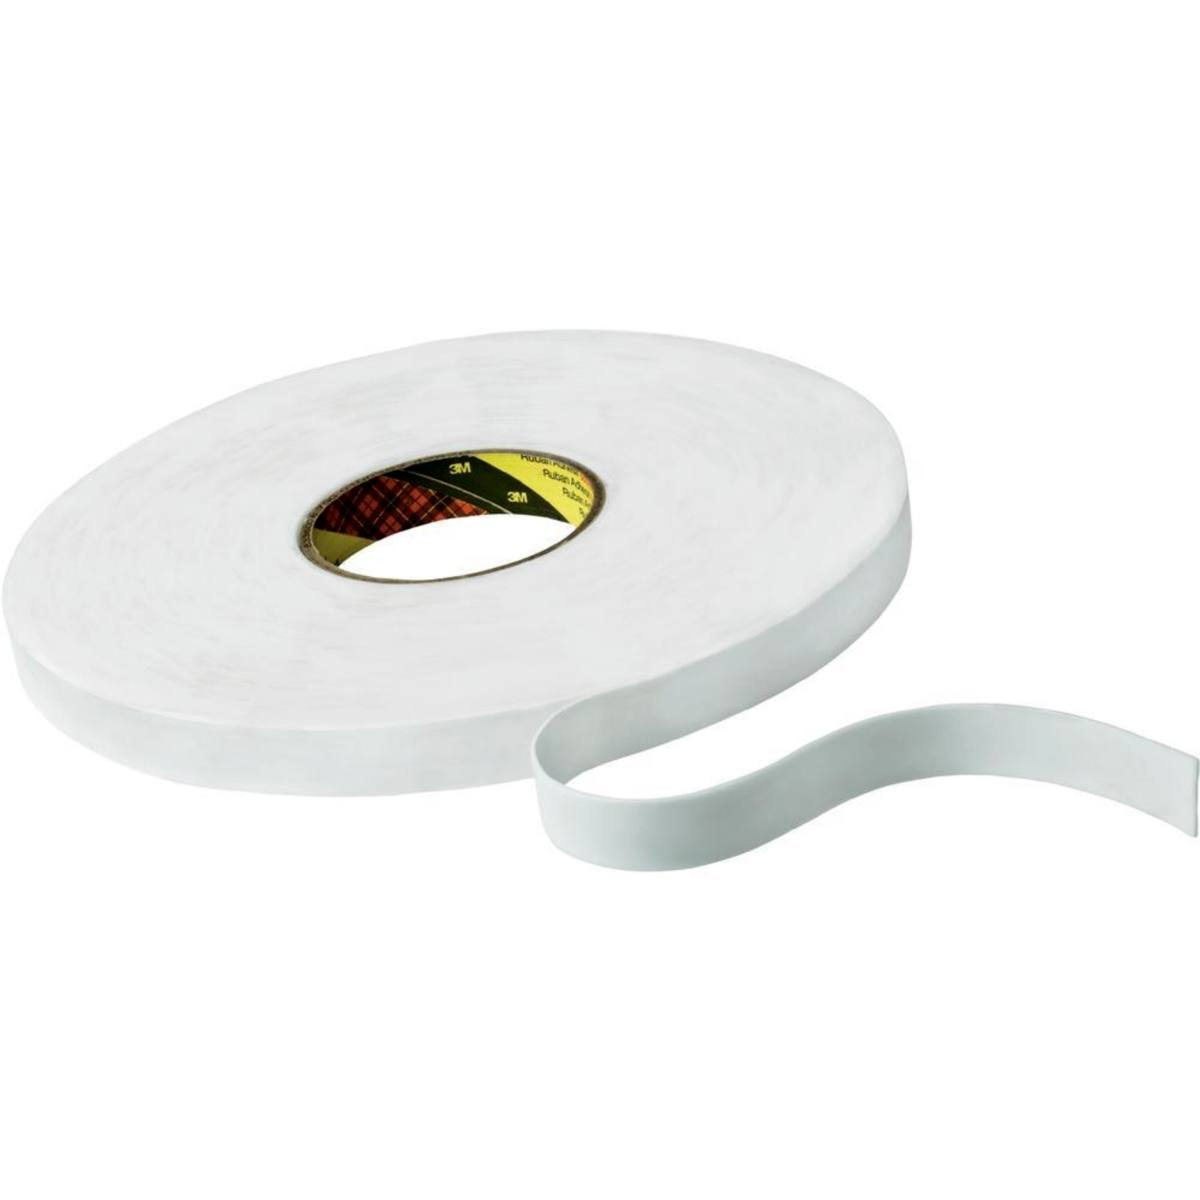 3M PE foam adhesive tape with acrylic adhesive 9546, white, 1250 mm x 66 m, 1.1 mm